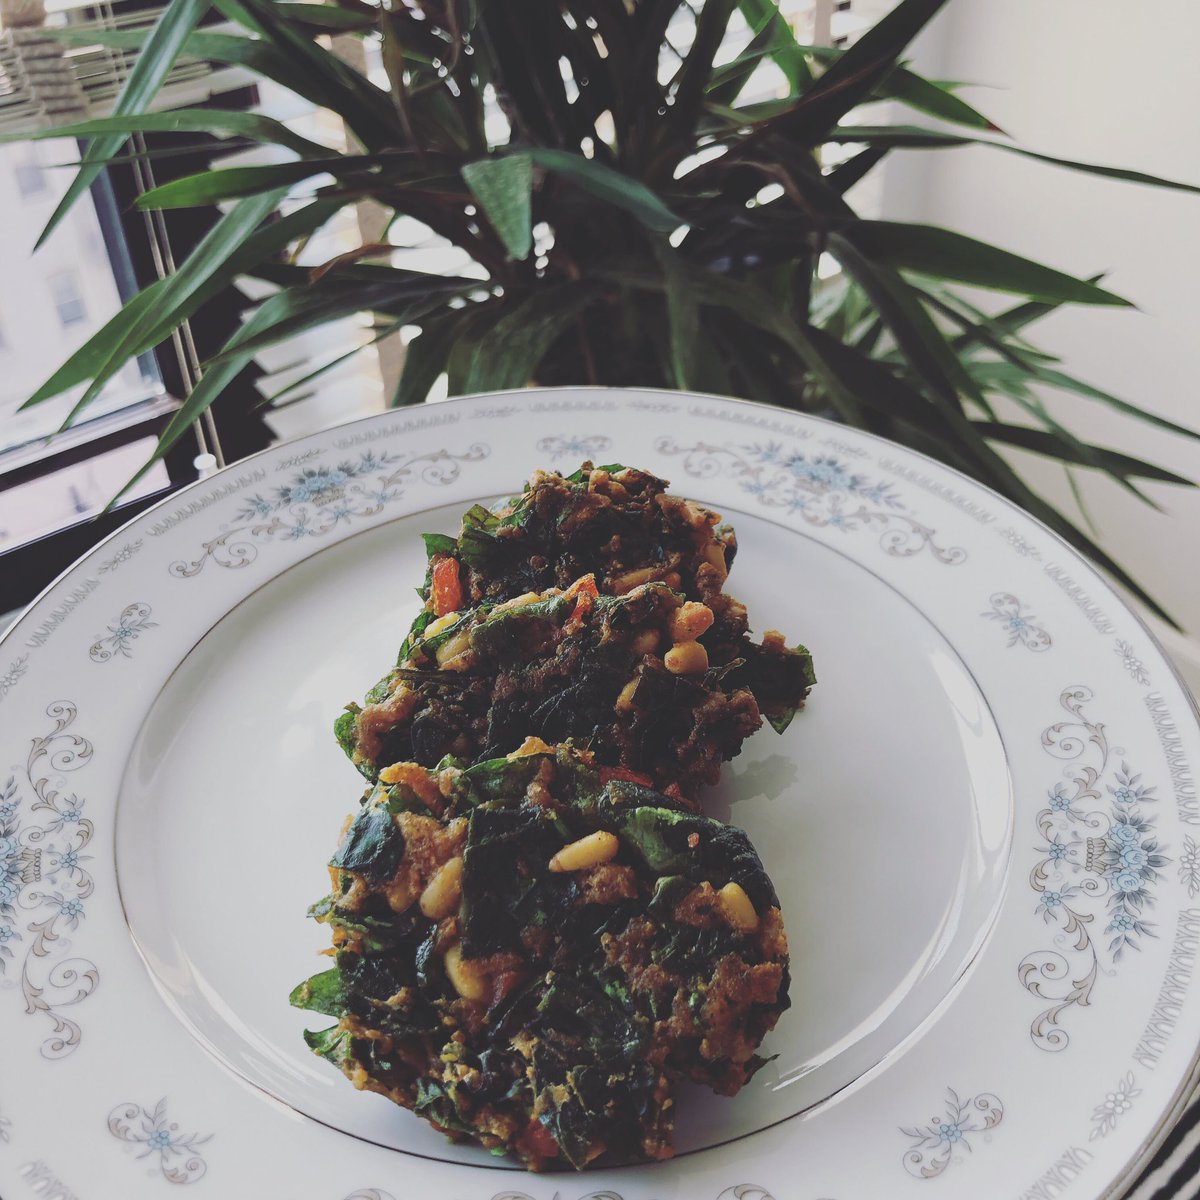 Spelt & spinach fritters for the win! These vegan patties are filling & packed with spice! #customizedcuisine #speltflour #fiddleheadchef #spinachfritters #plantfocused #colorfulfood #veganeats #eatyourveggies #nourishyourbody